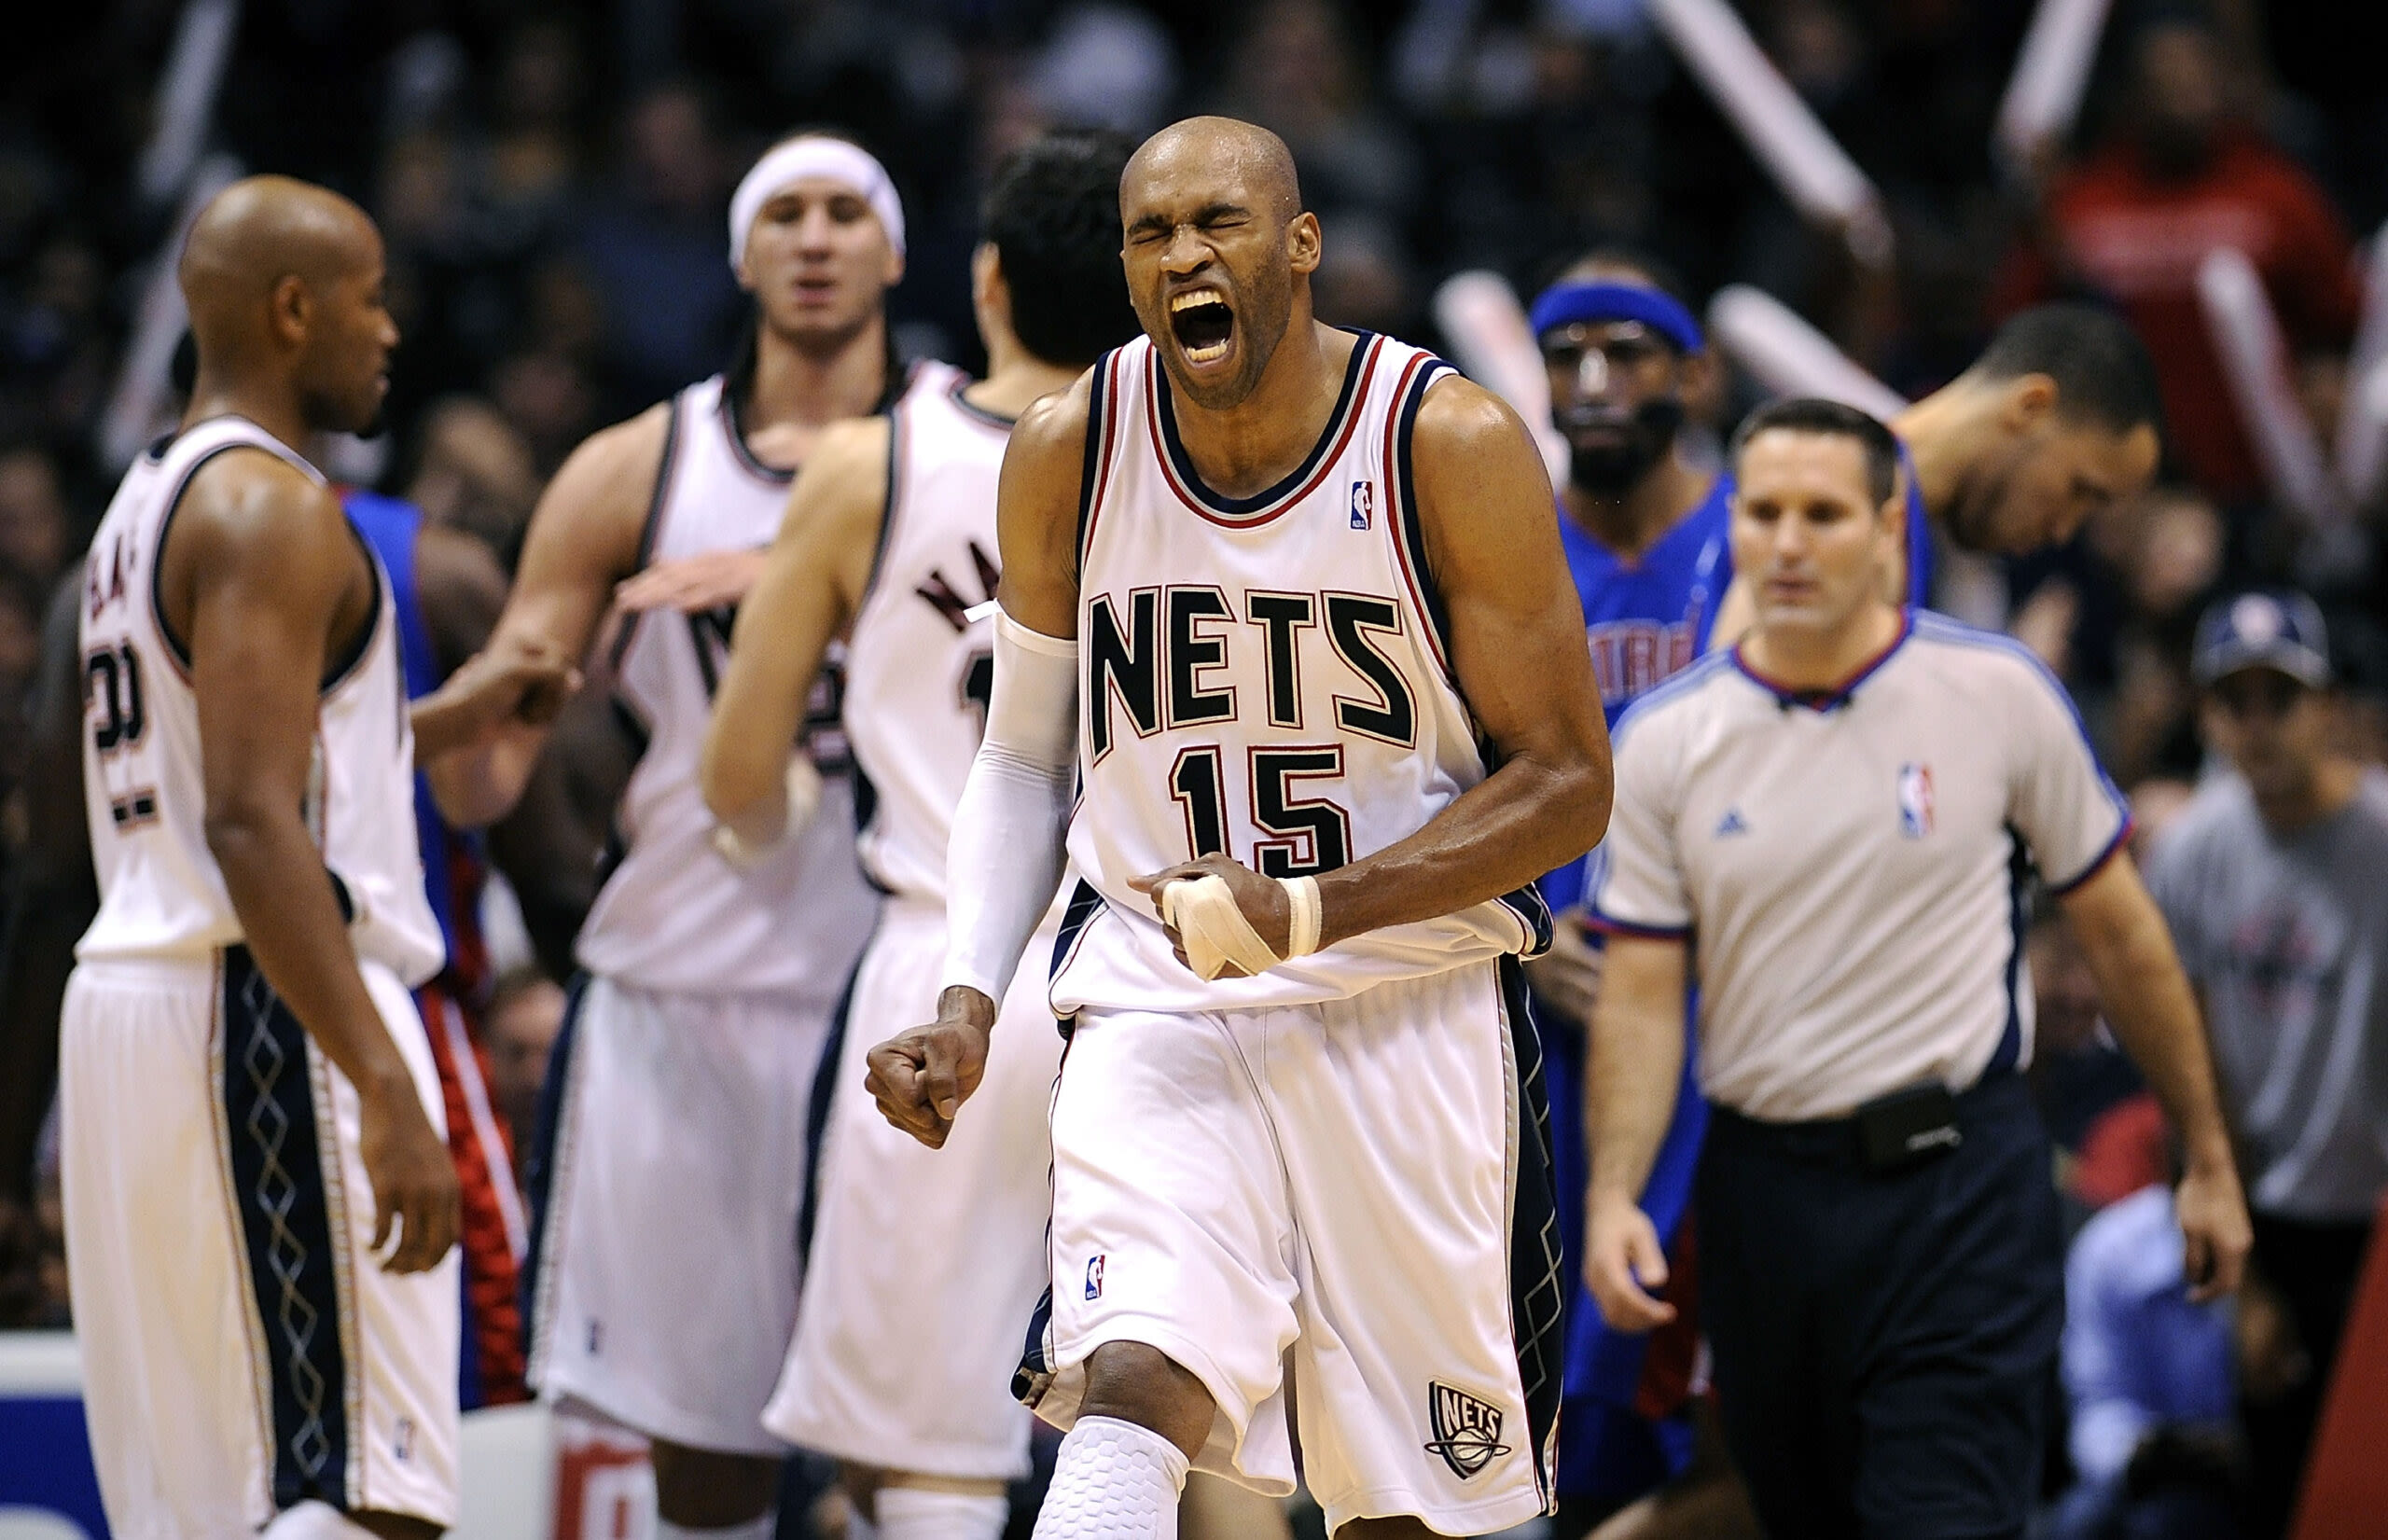 The Brooklyn Nets announce they will retire Vince Carter’s jersey number